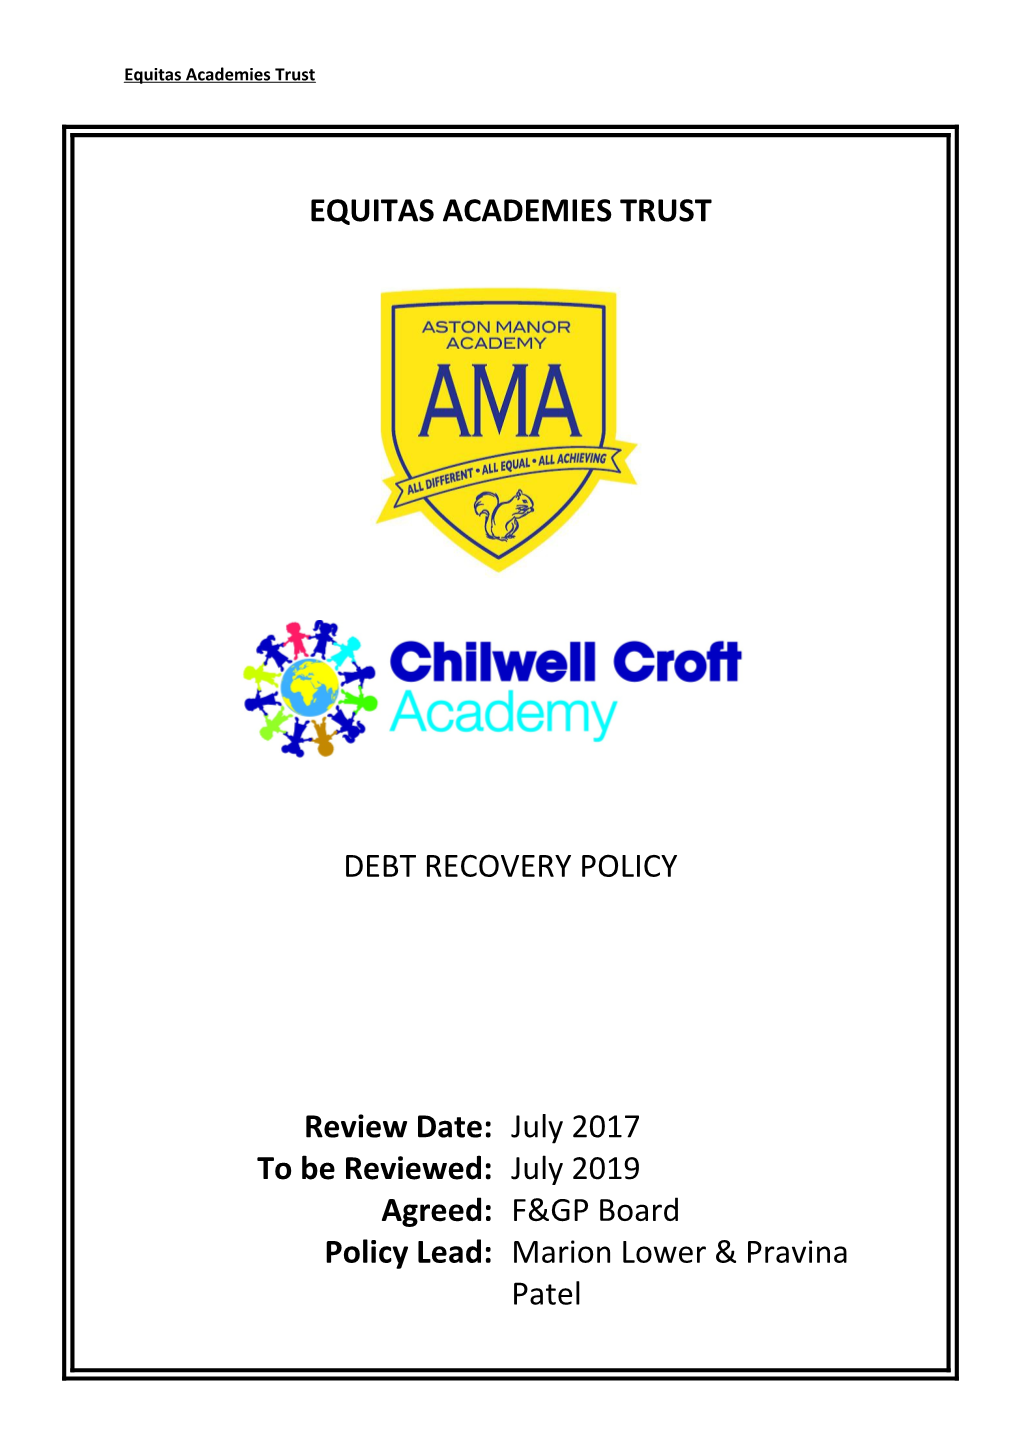 Debt Recovery Policy